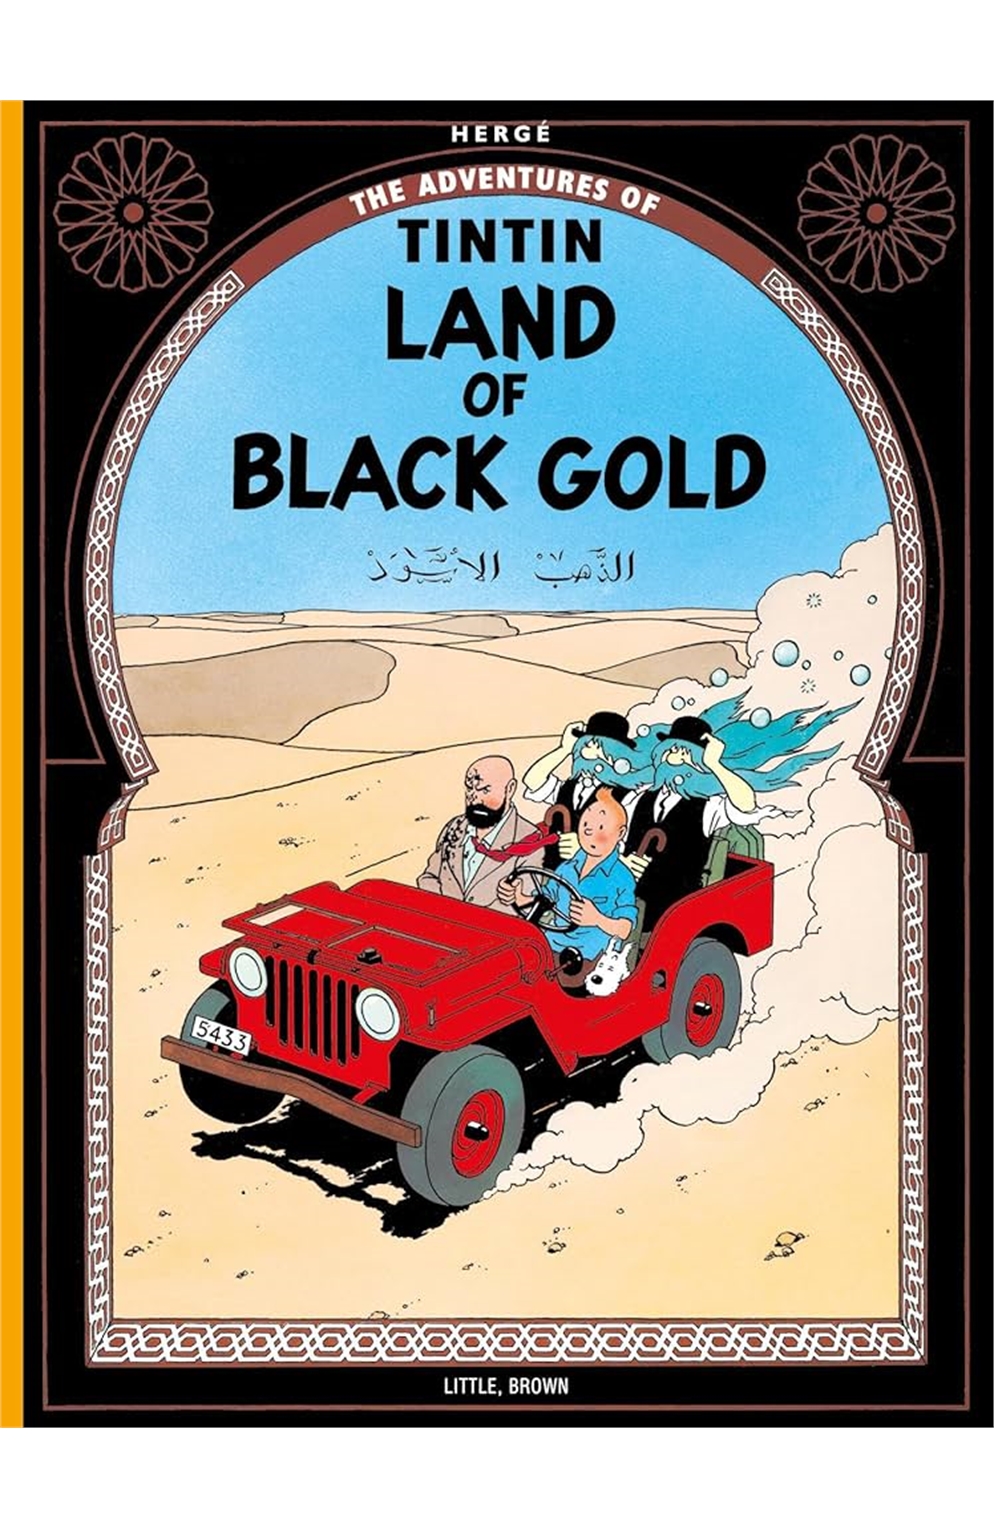 The Adventures of Tintin - Land of Black Gold